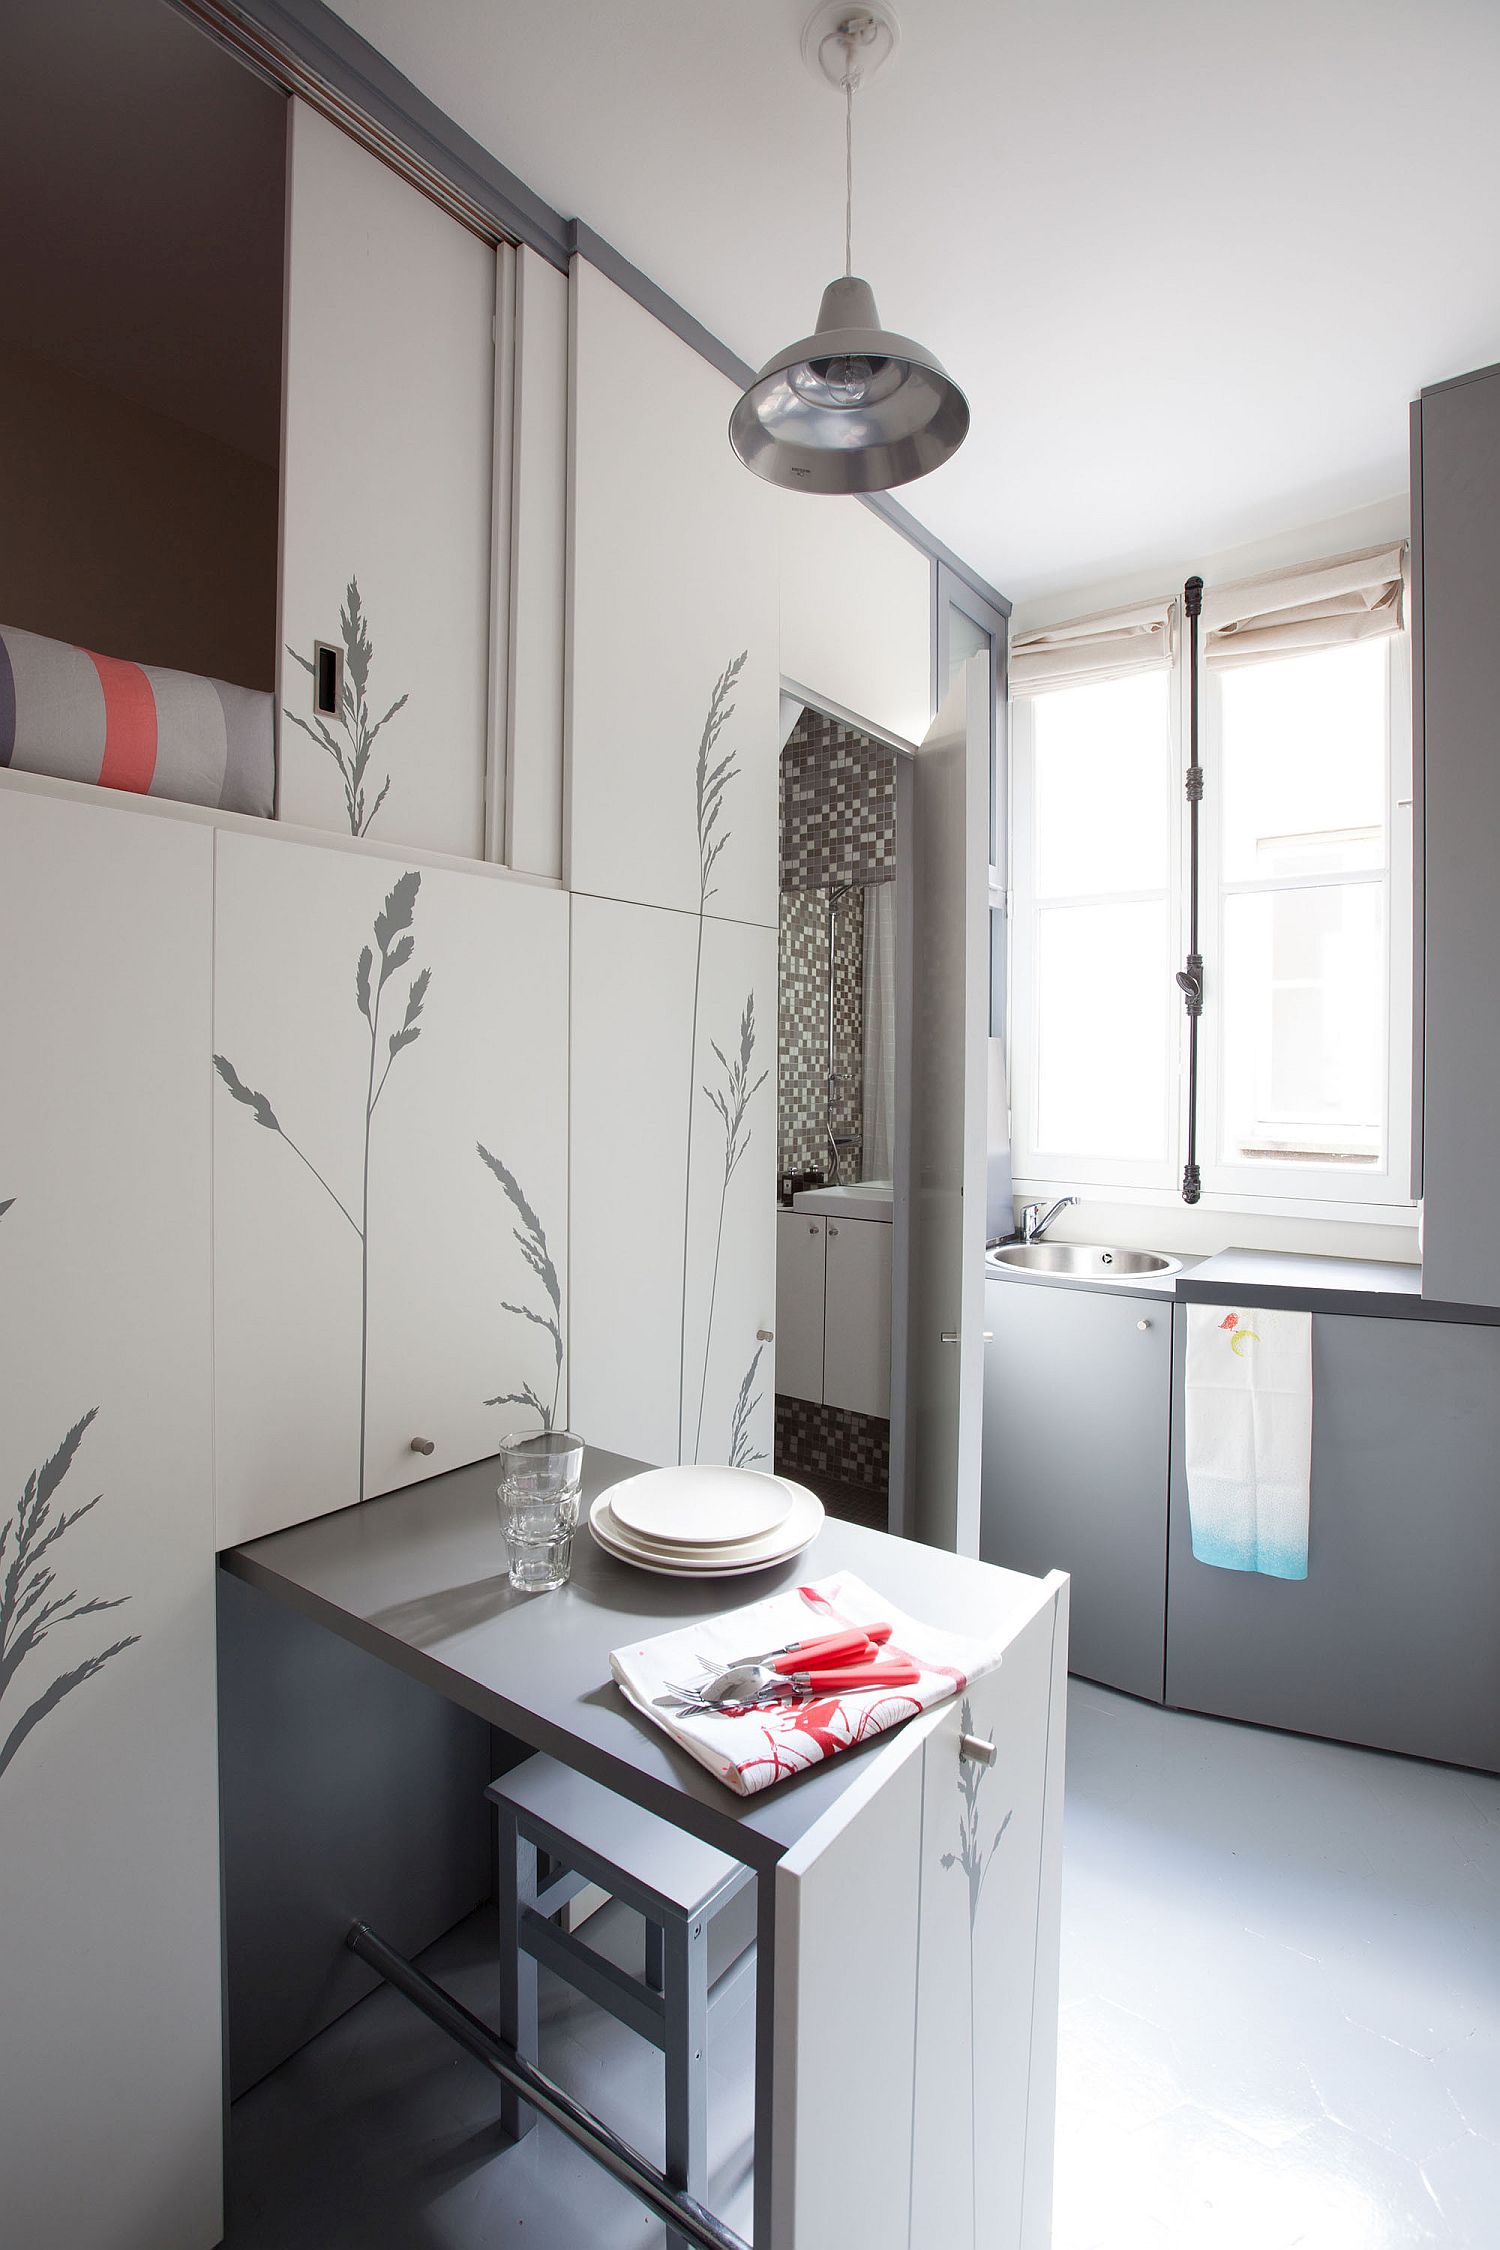 Take A Look Inside This Surprisingly Livable 8 Sqm Apartment